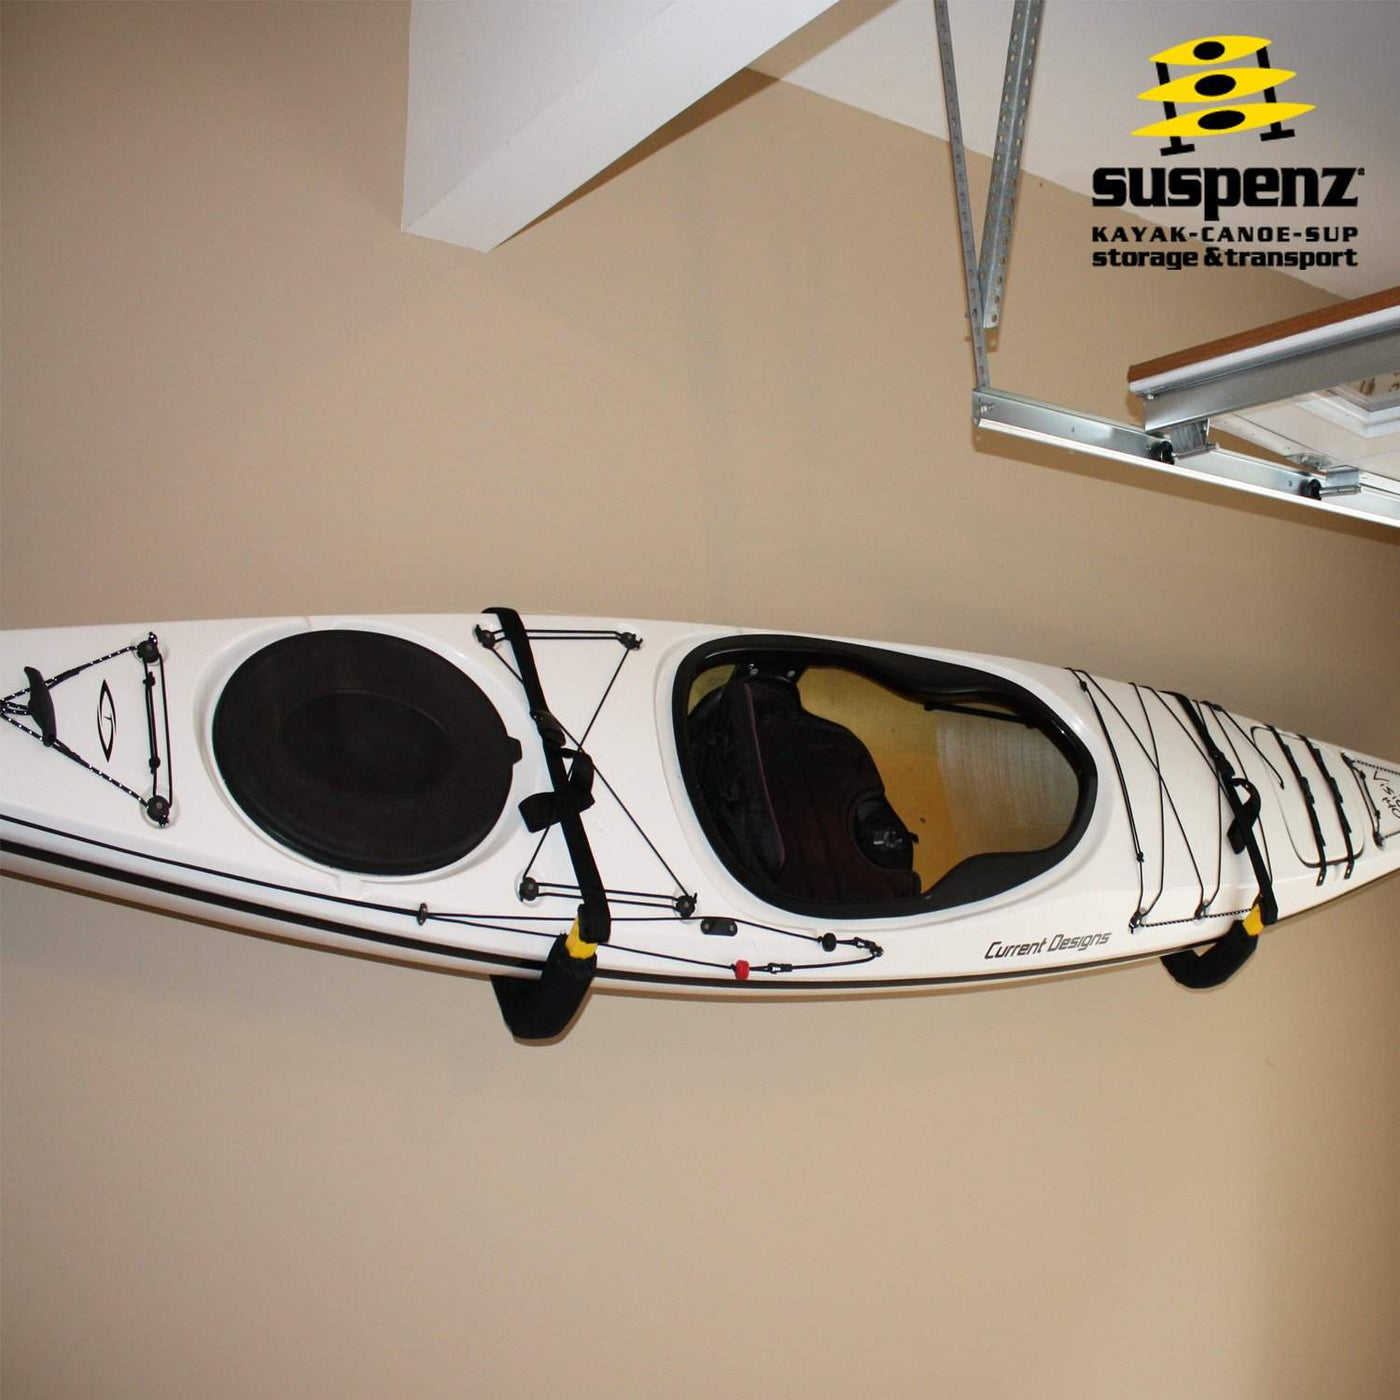 A white kayak resting on an ez rack mounted to a garage wal